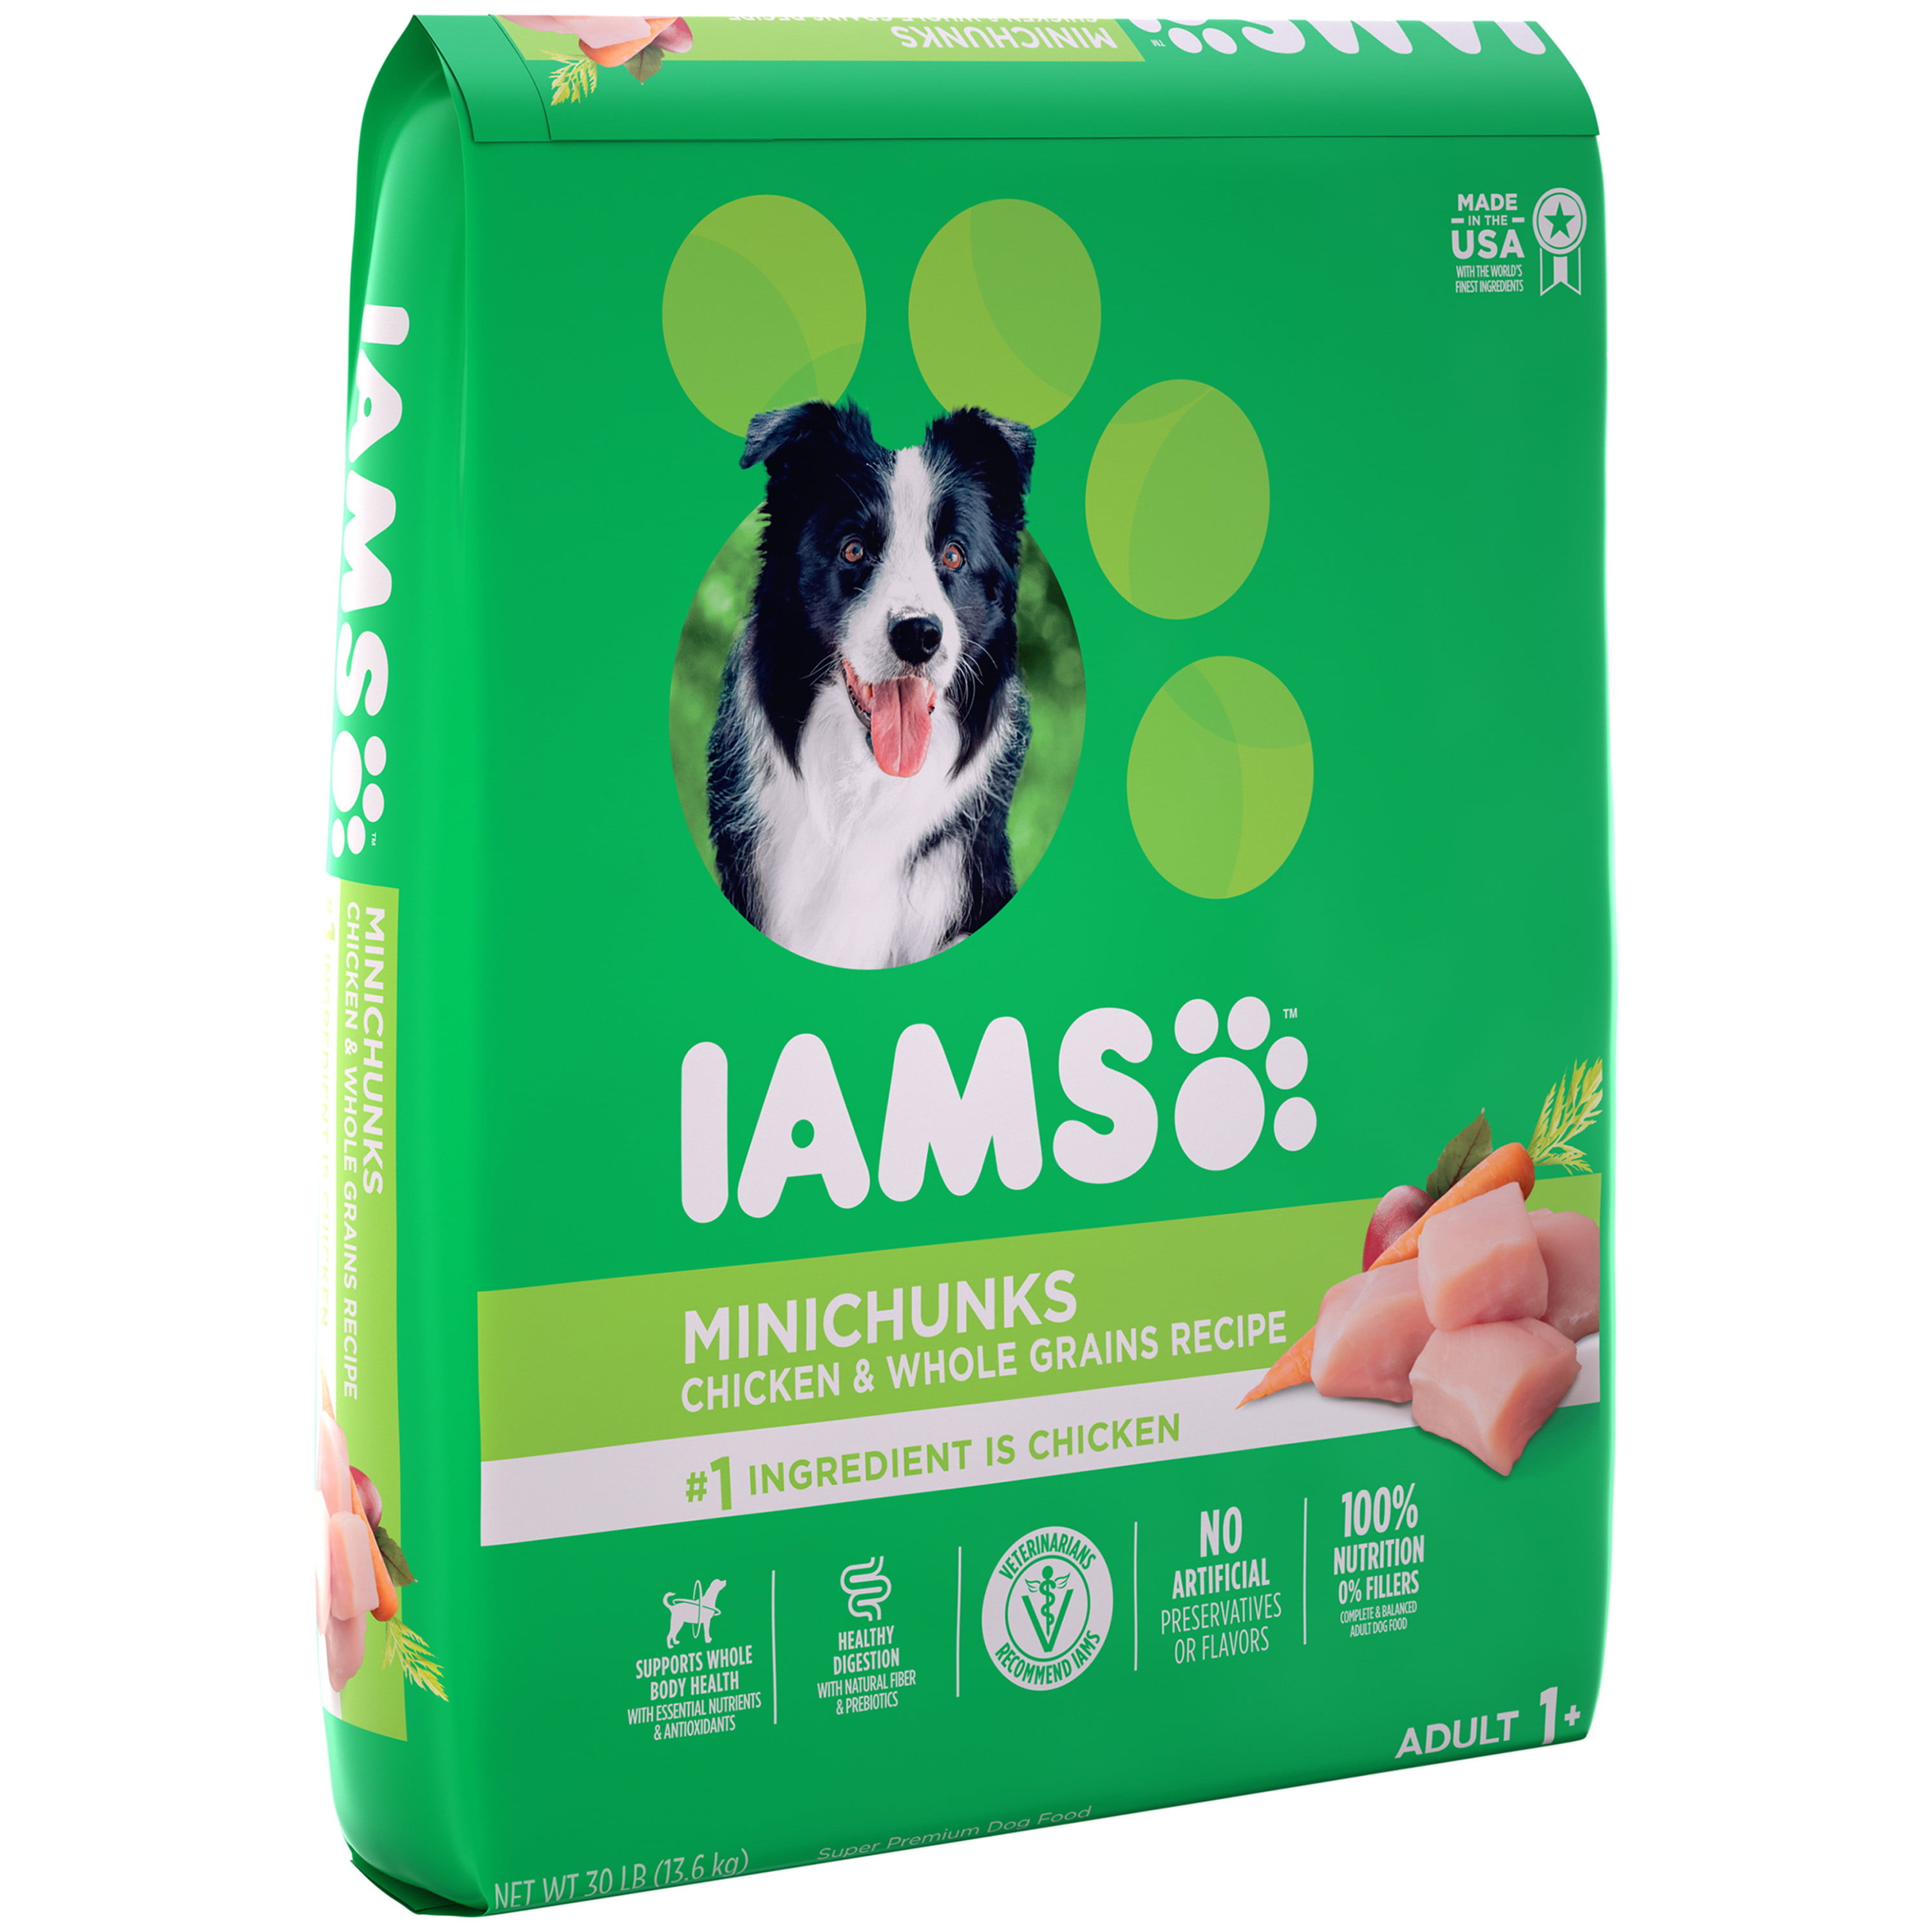 iams or science diet puppy food